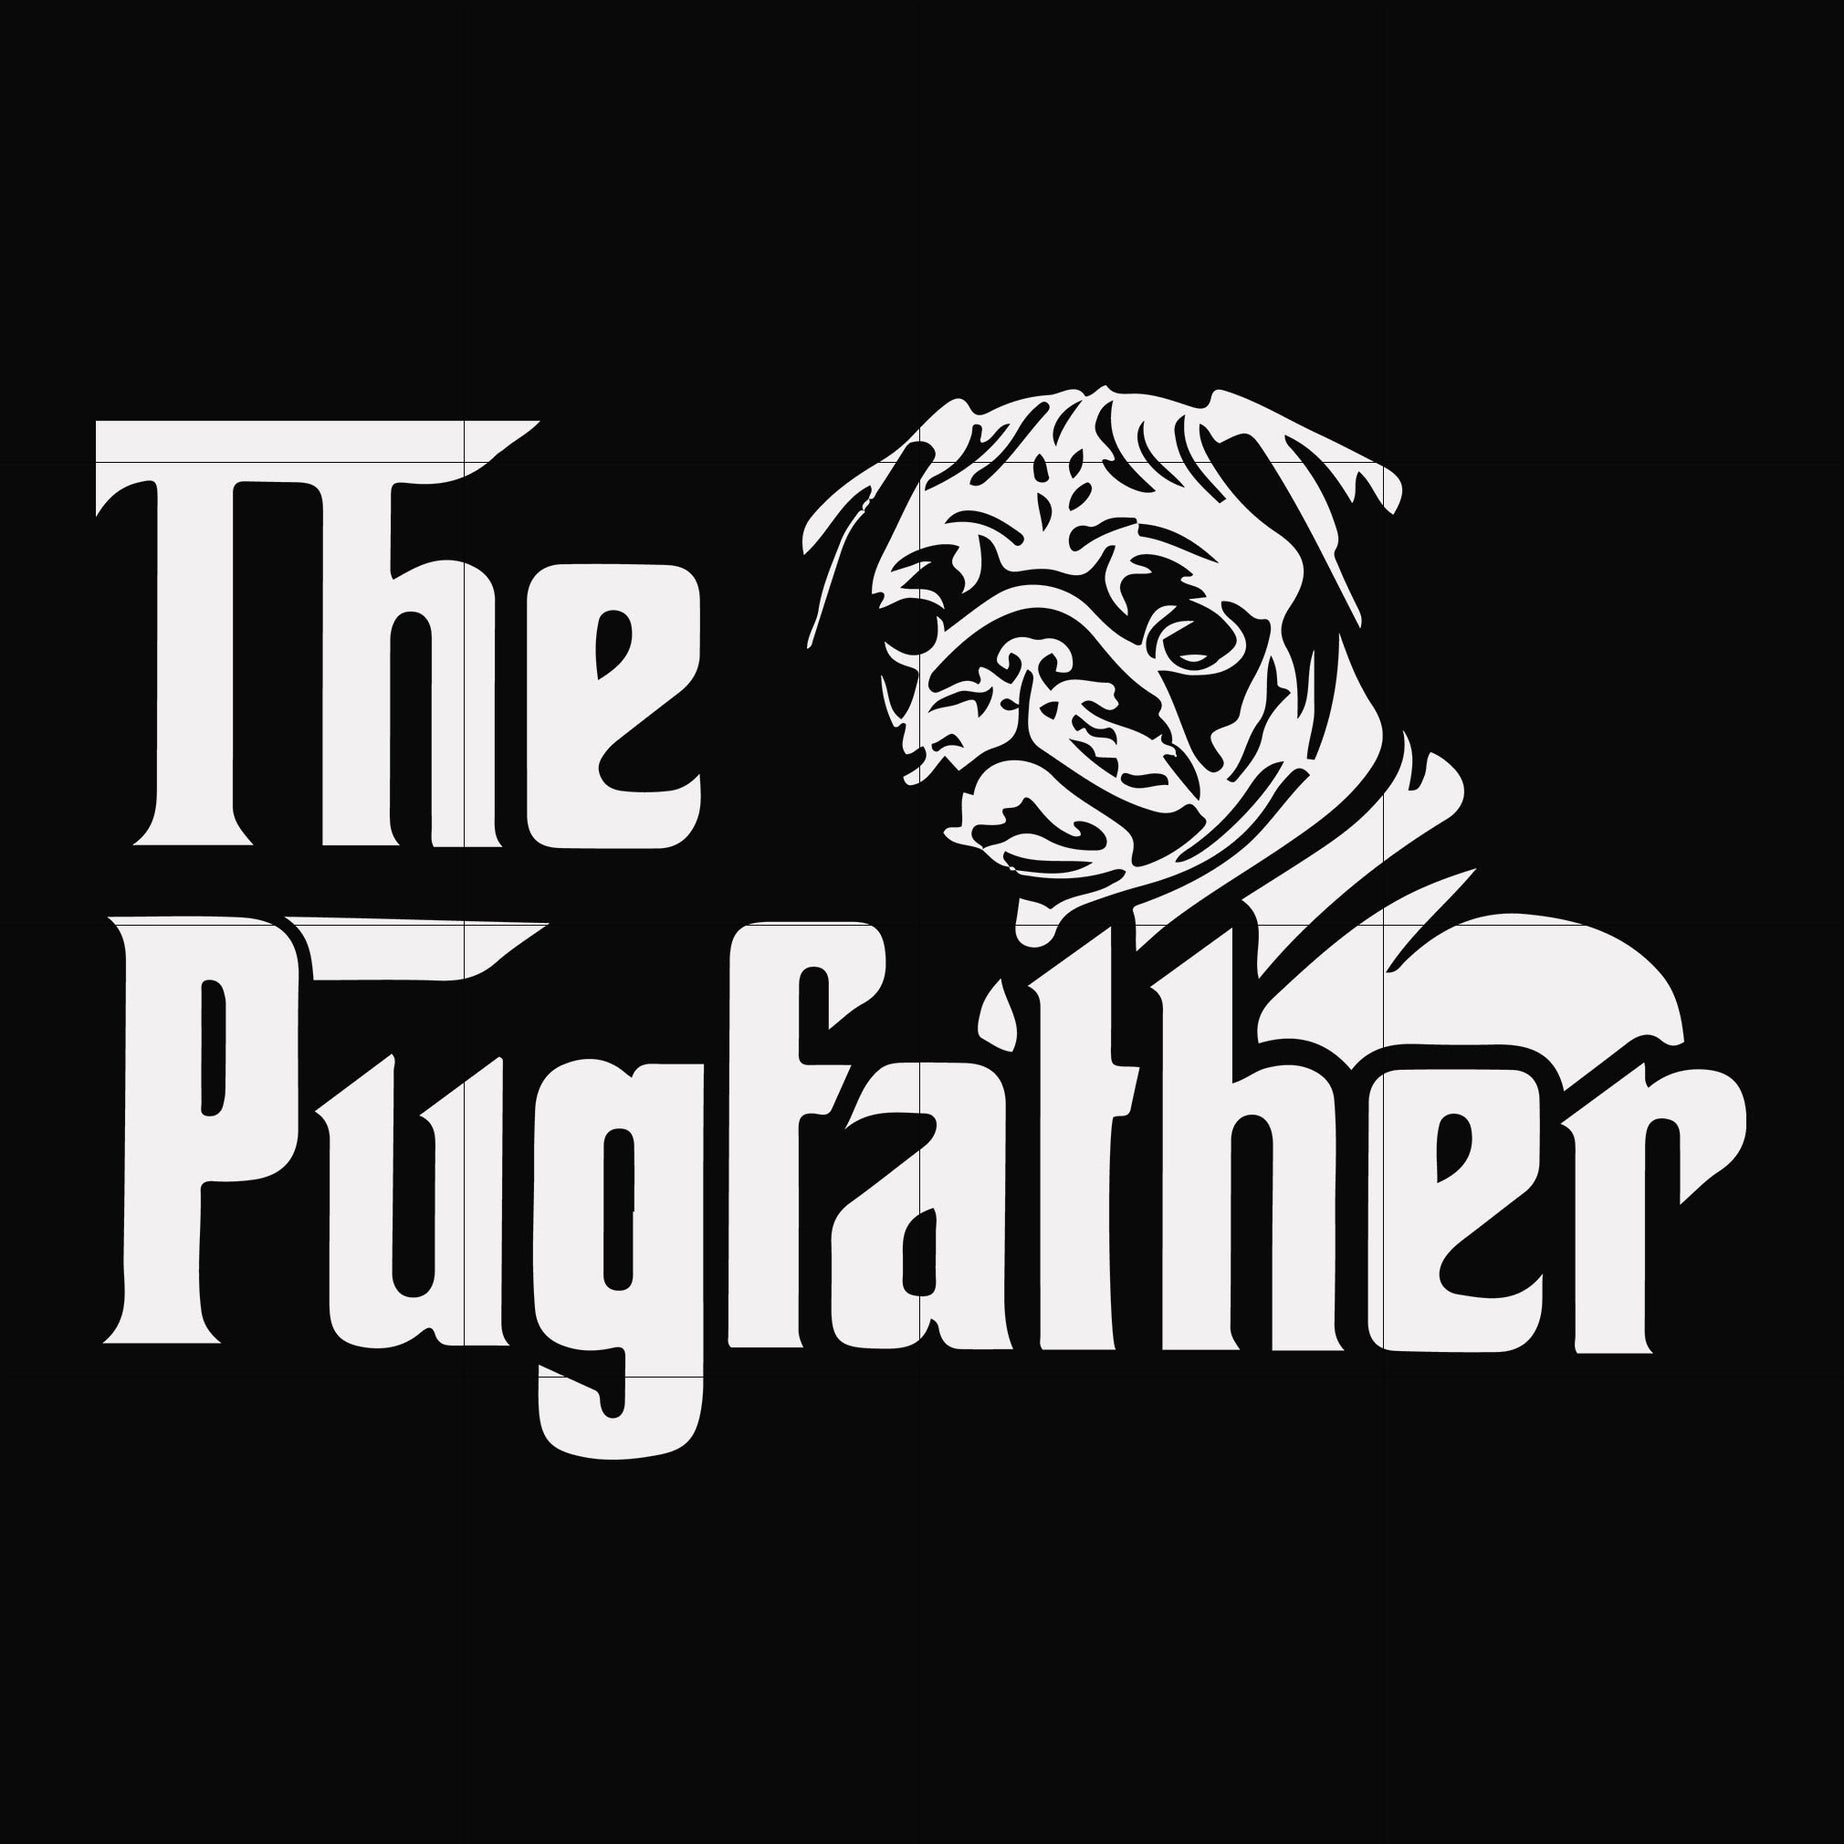 The pugfather svg, png, dxf, eps file FN000965